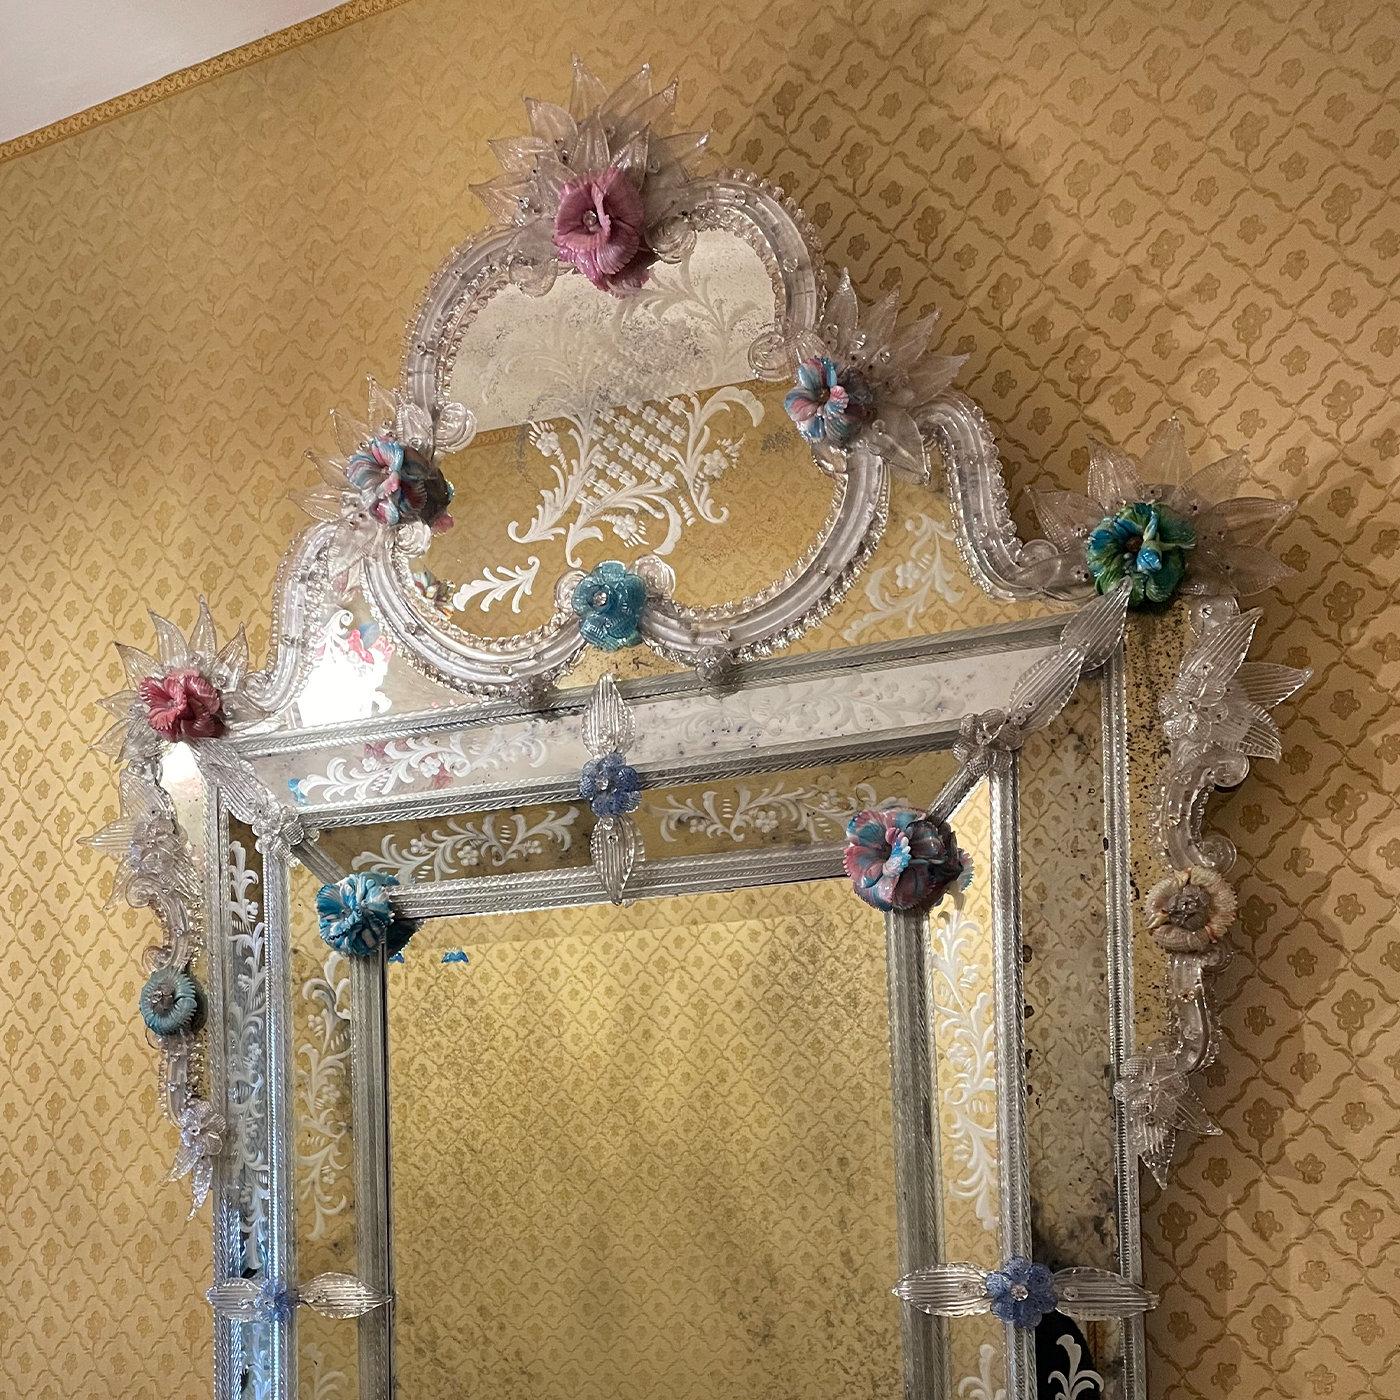 An array of leaves and frond details in antique-finished crystal embellish the sinuous frame of this sublime, one-off mirror handcrafted by Venetian master glassmakers. The three-dimensional flower inserts in multicolored glass paste add a touch of